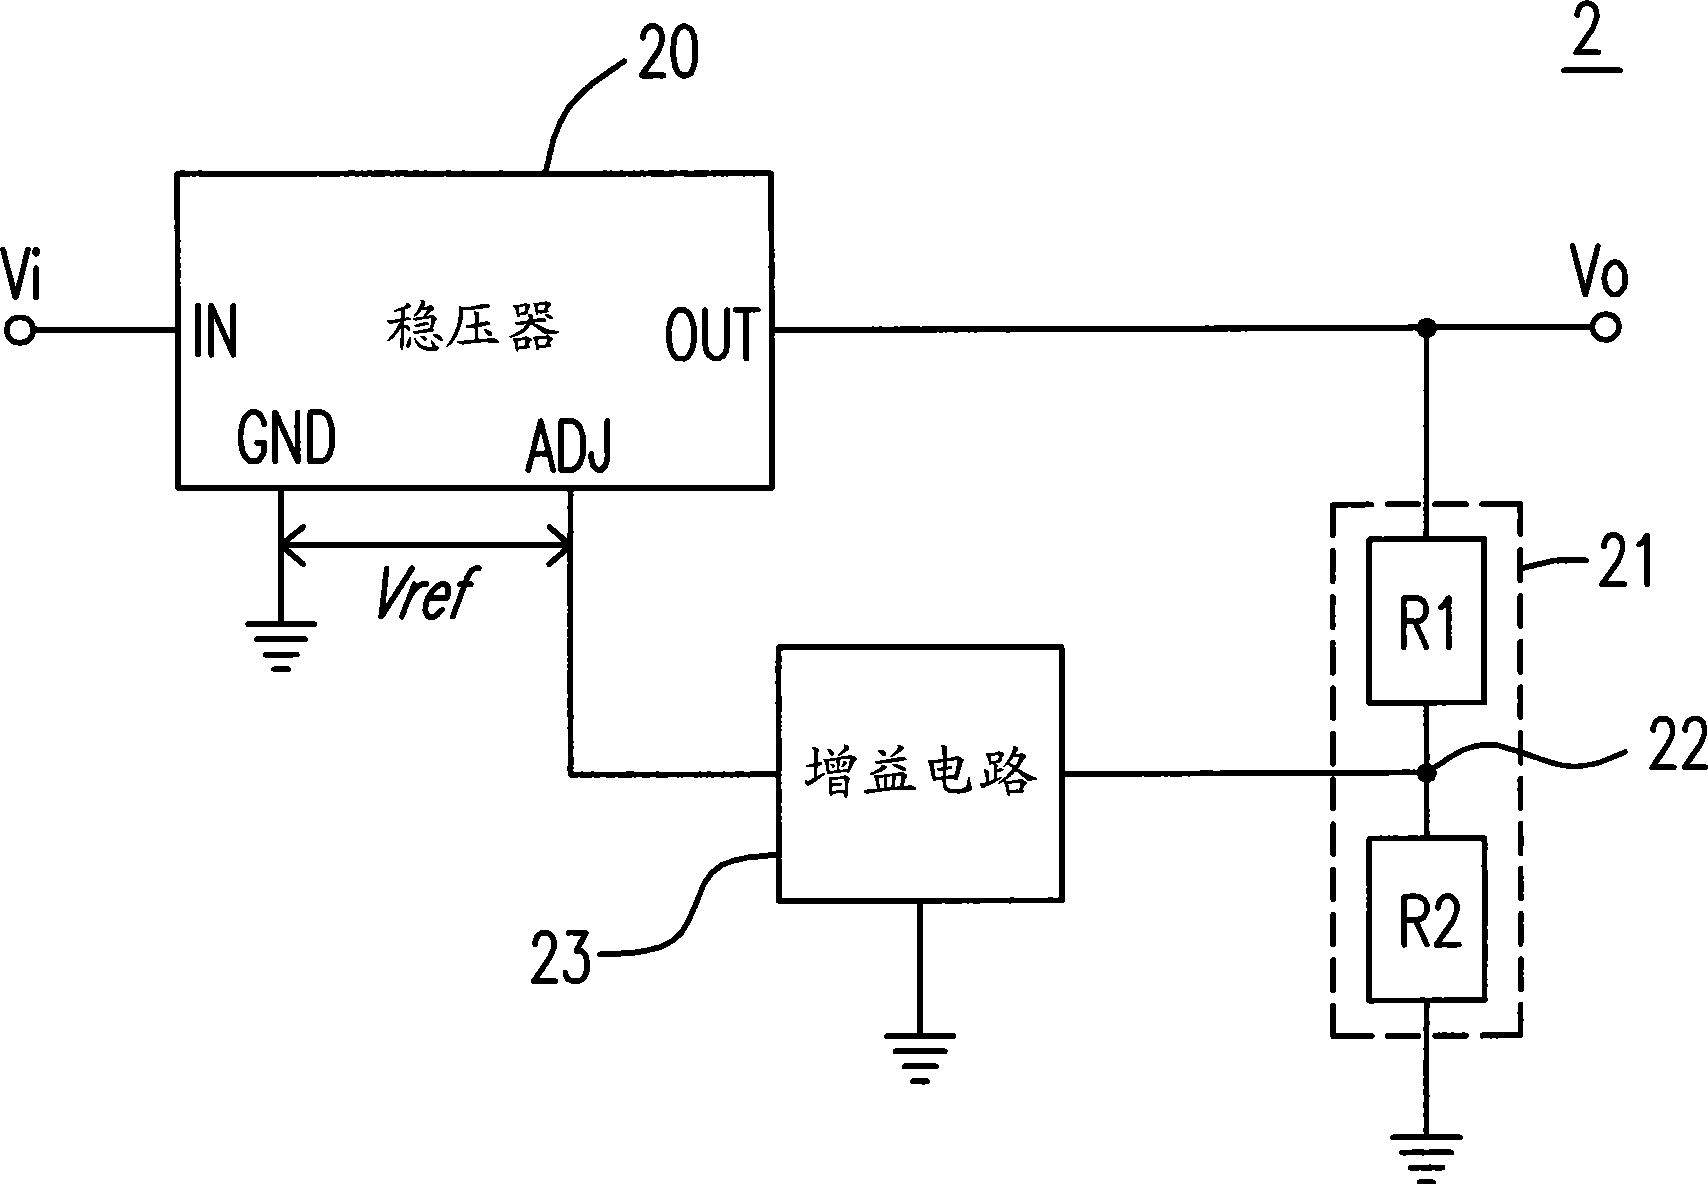 Power supply circuit capable of generating output voltage close to zero and its regulation method